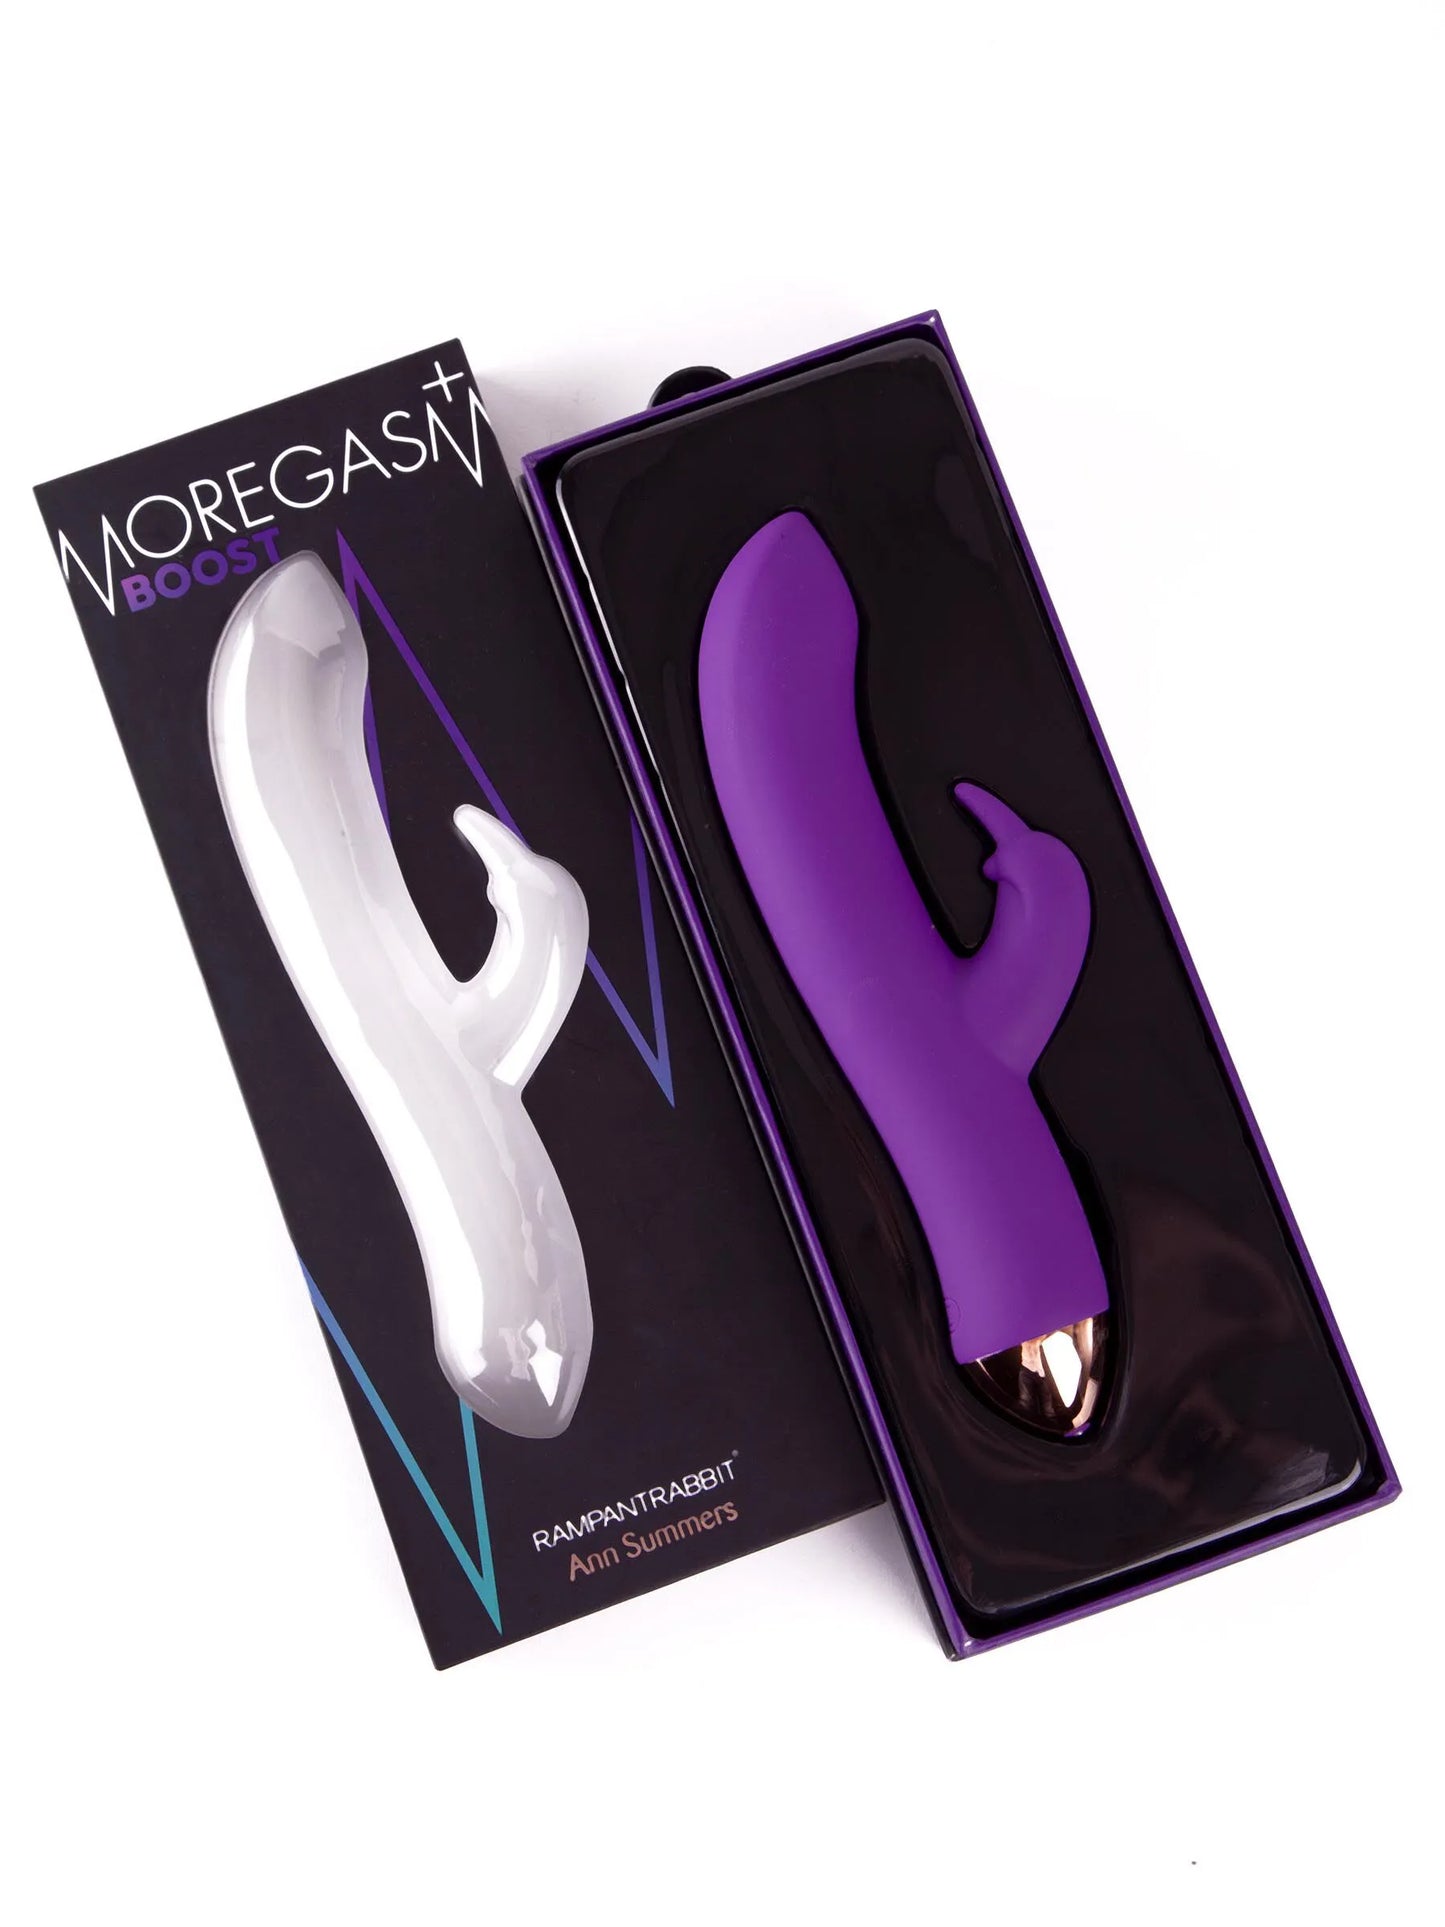 Moregasm Boost Rabbit From Ann Summers, Image 04